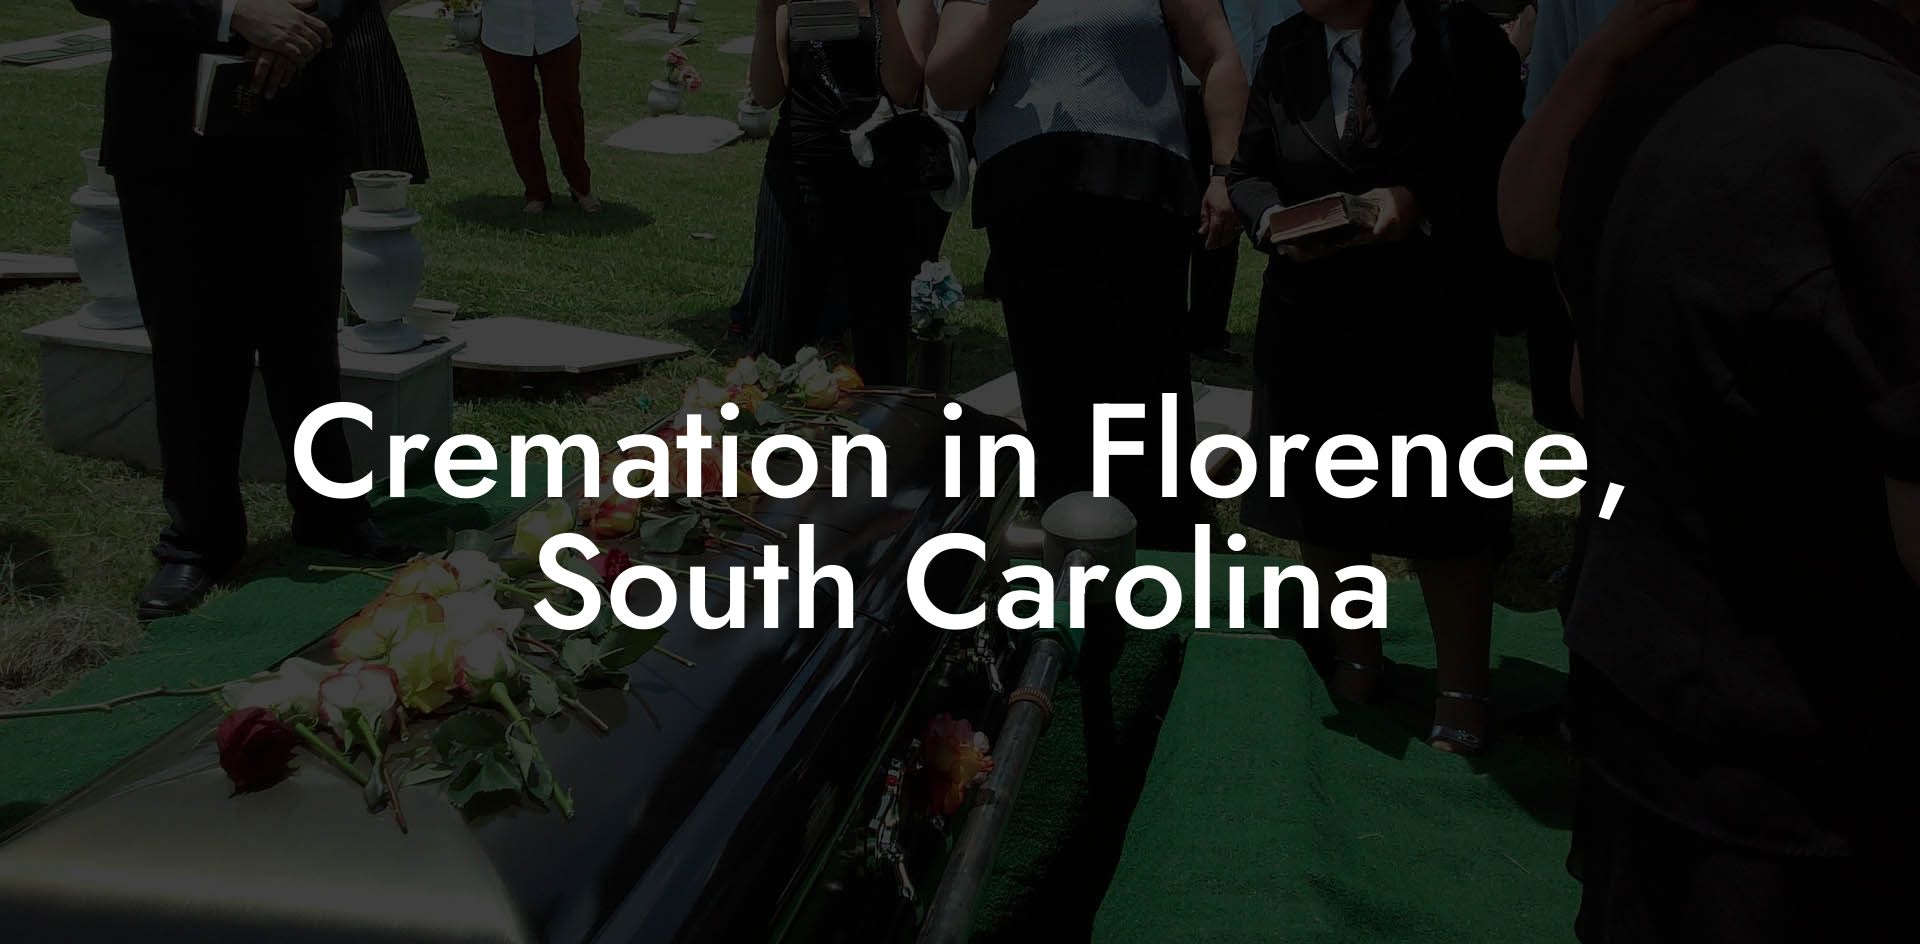 Cremation in Florence, South Carolina